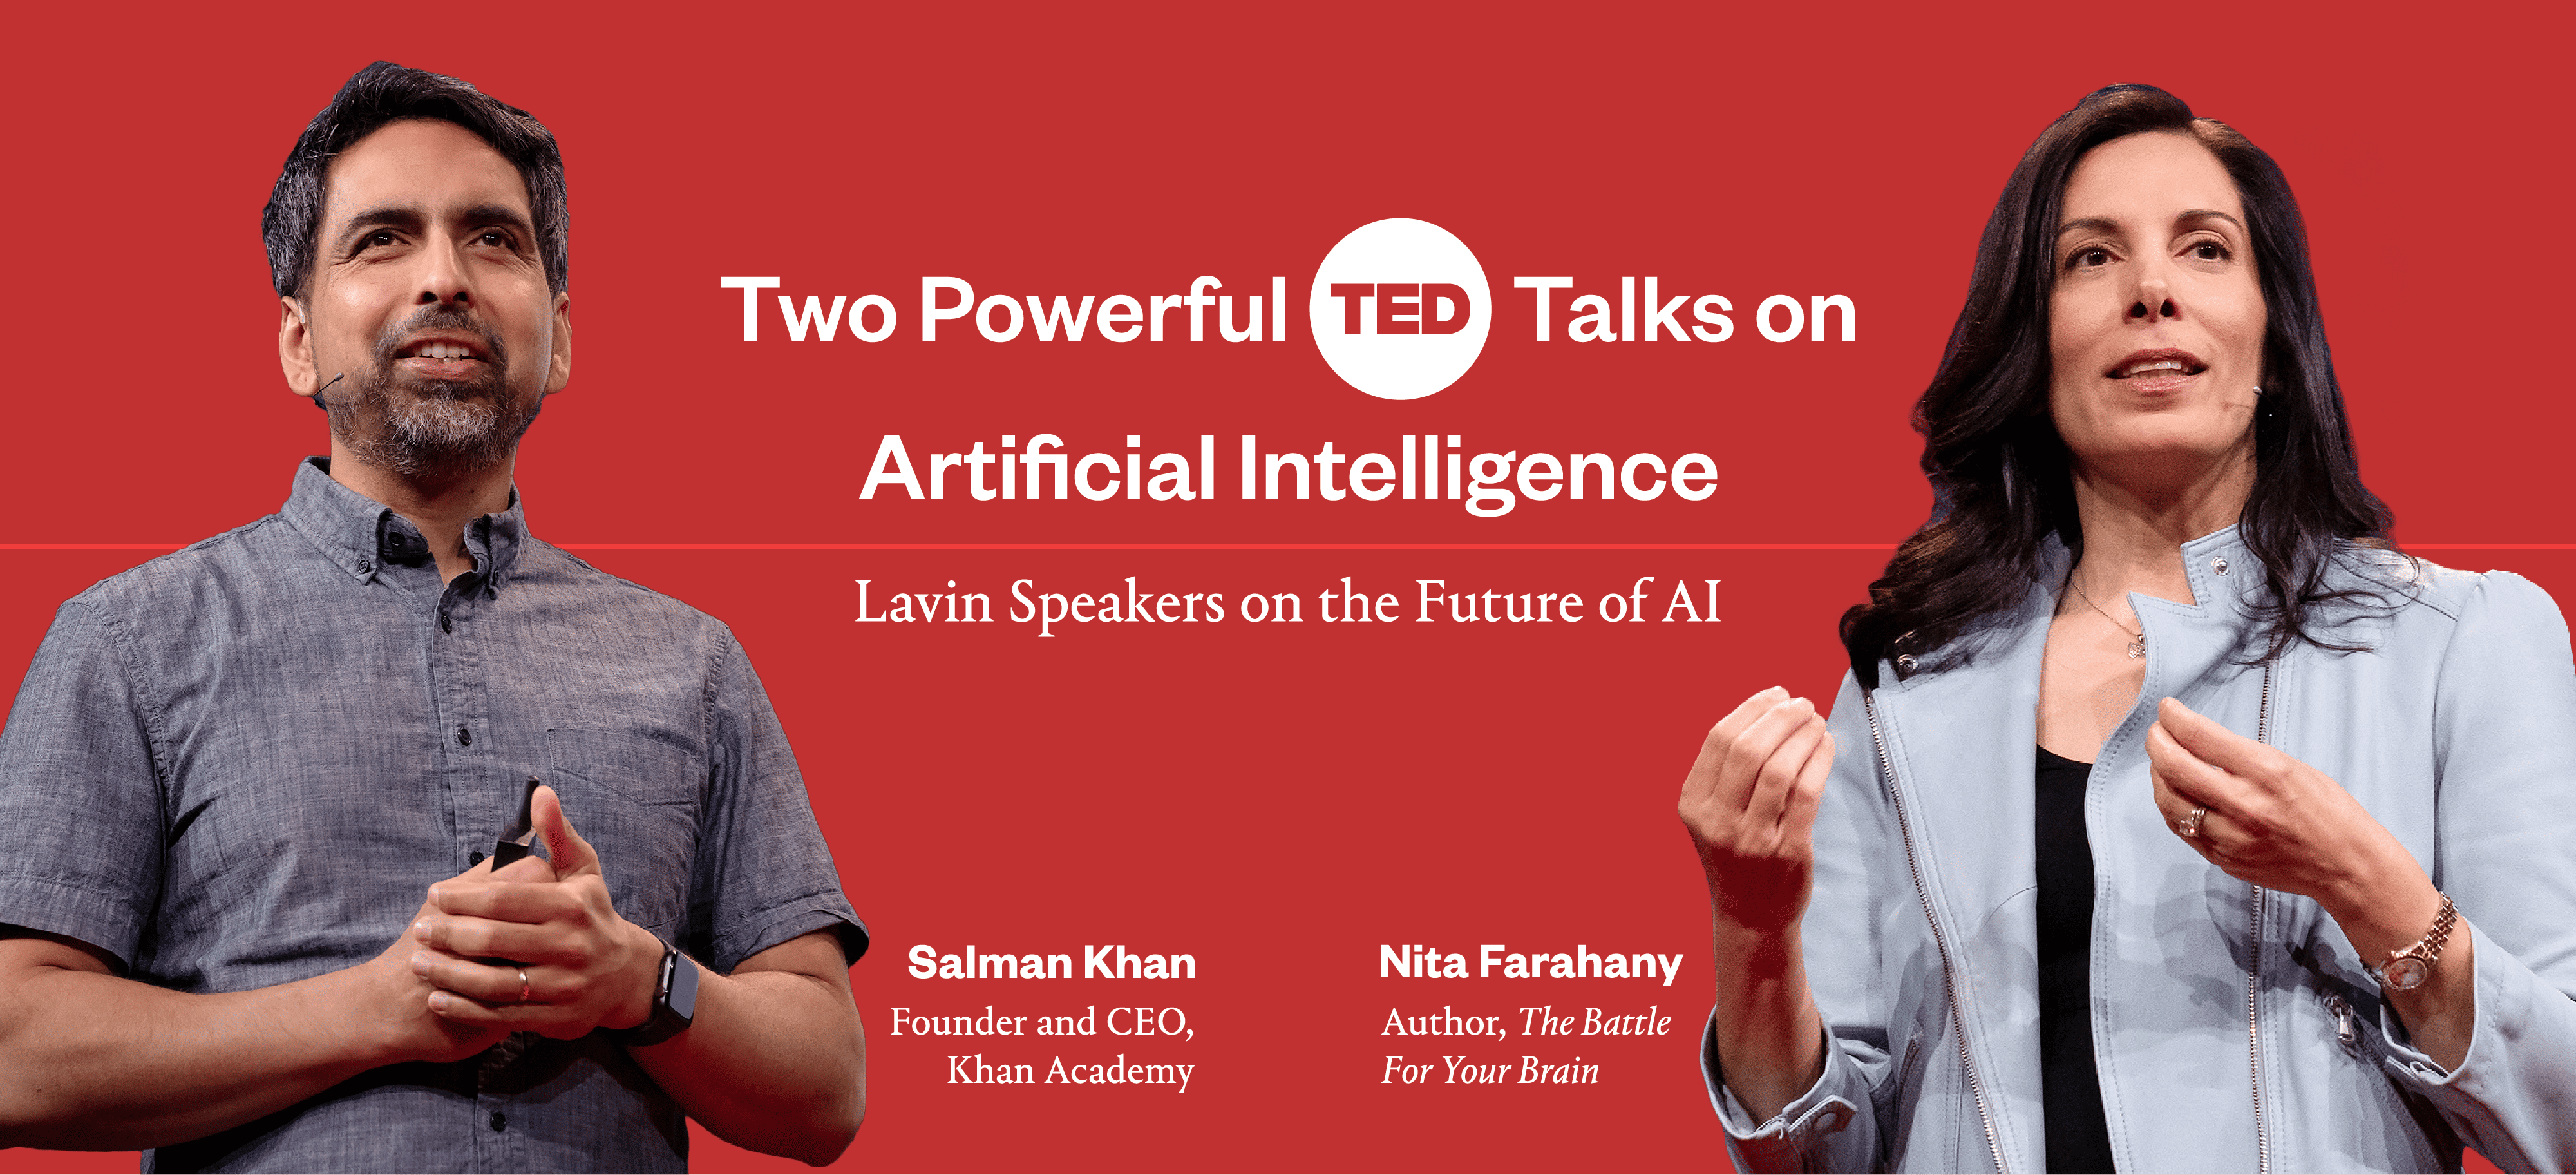 Two New AI Talks from the TED Mainstage: Lavin speakers on Education, the Brain, and New Technologies. Watch Now!